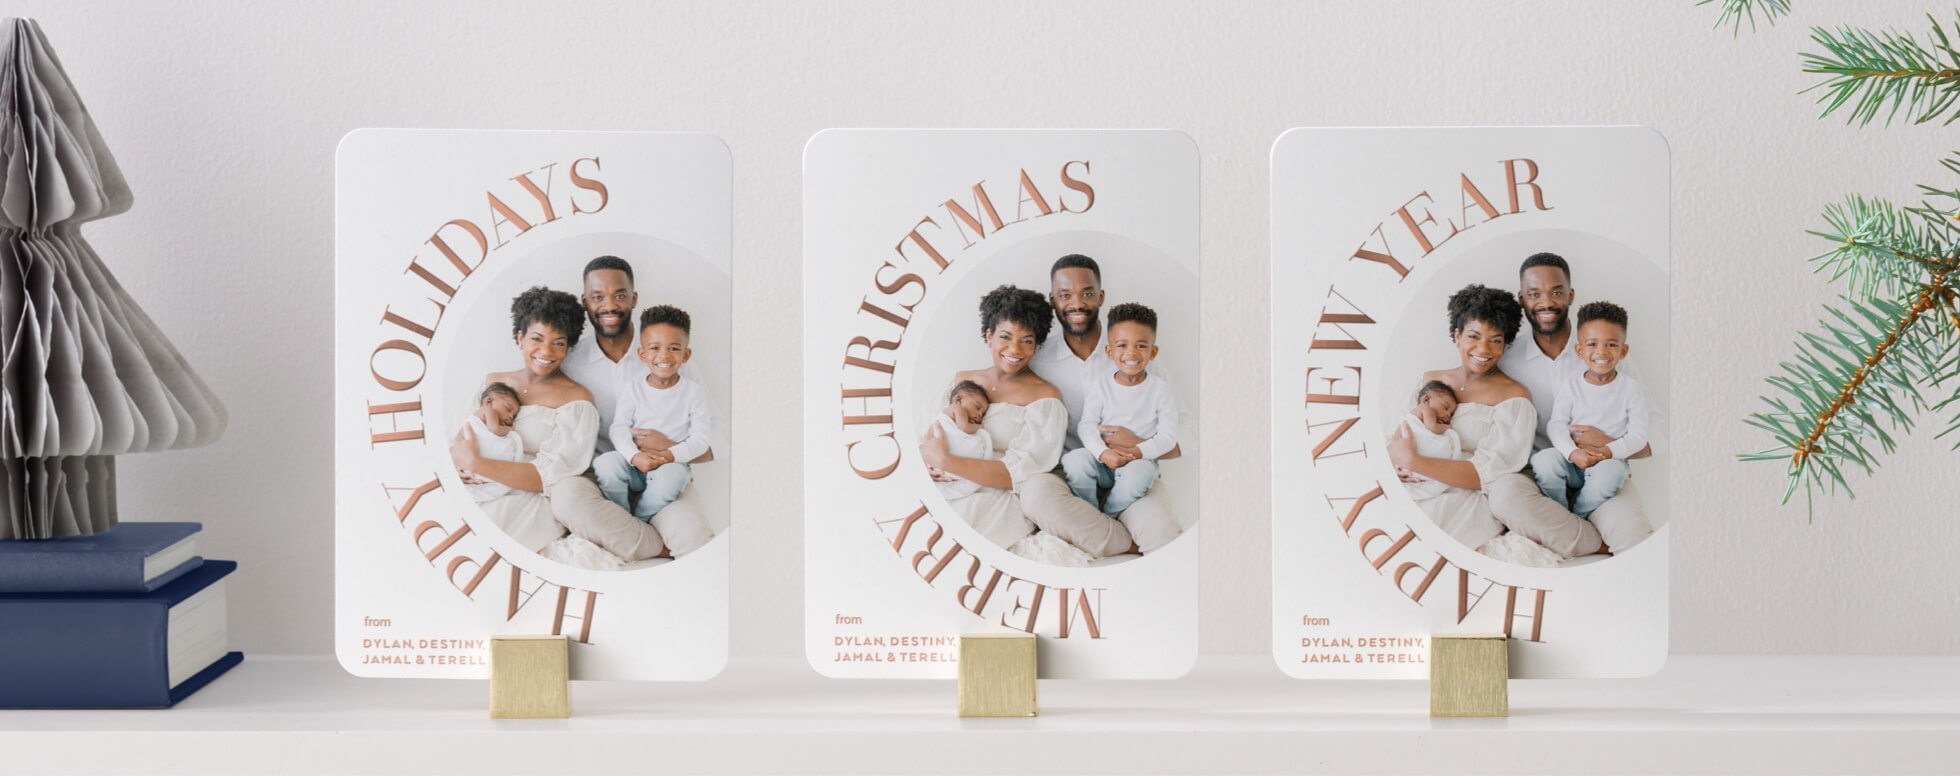 Find your holiday expression. choose from an array of holiday wishes that celebrate your traditions. shop holiday cards